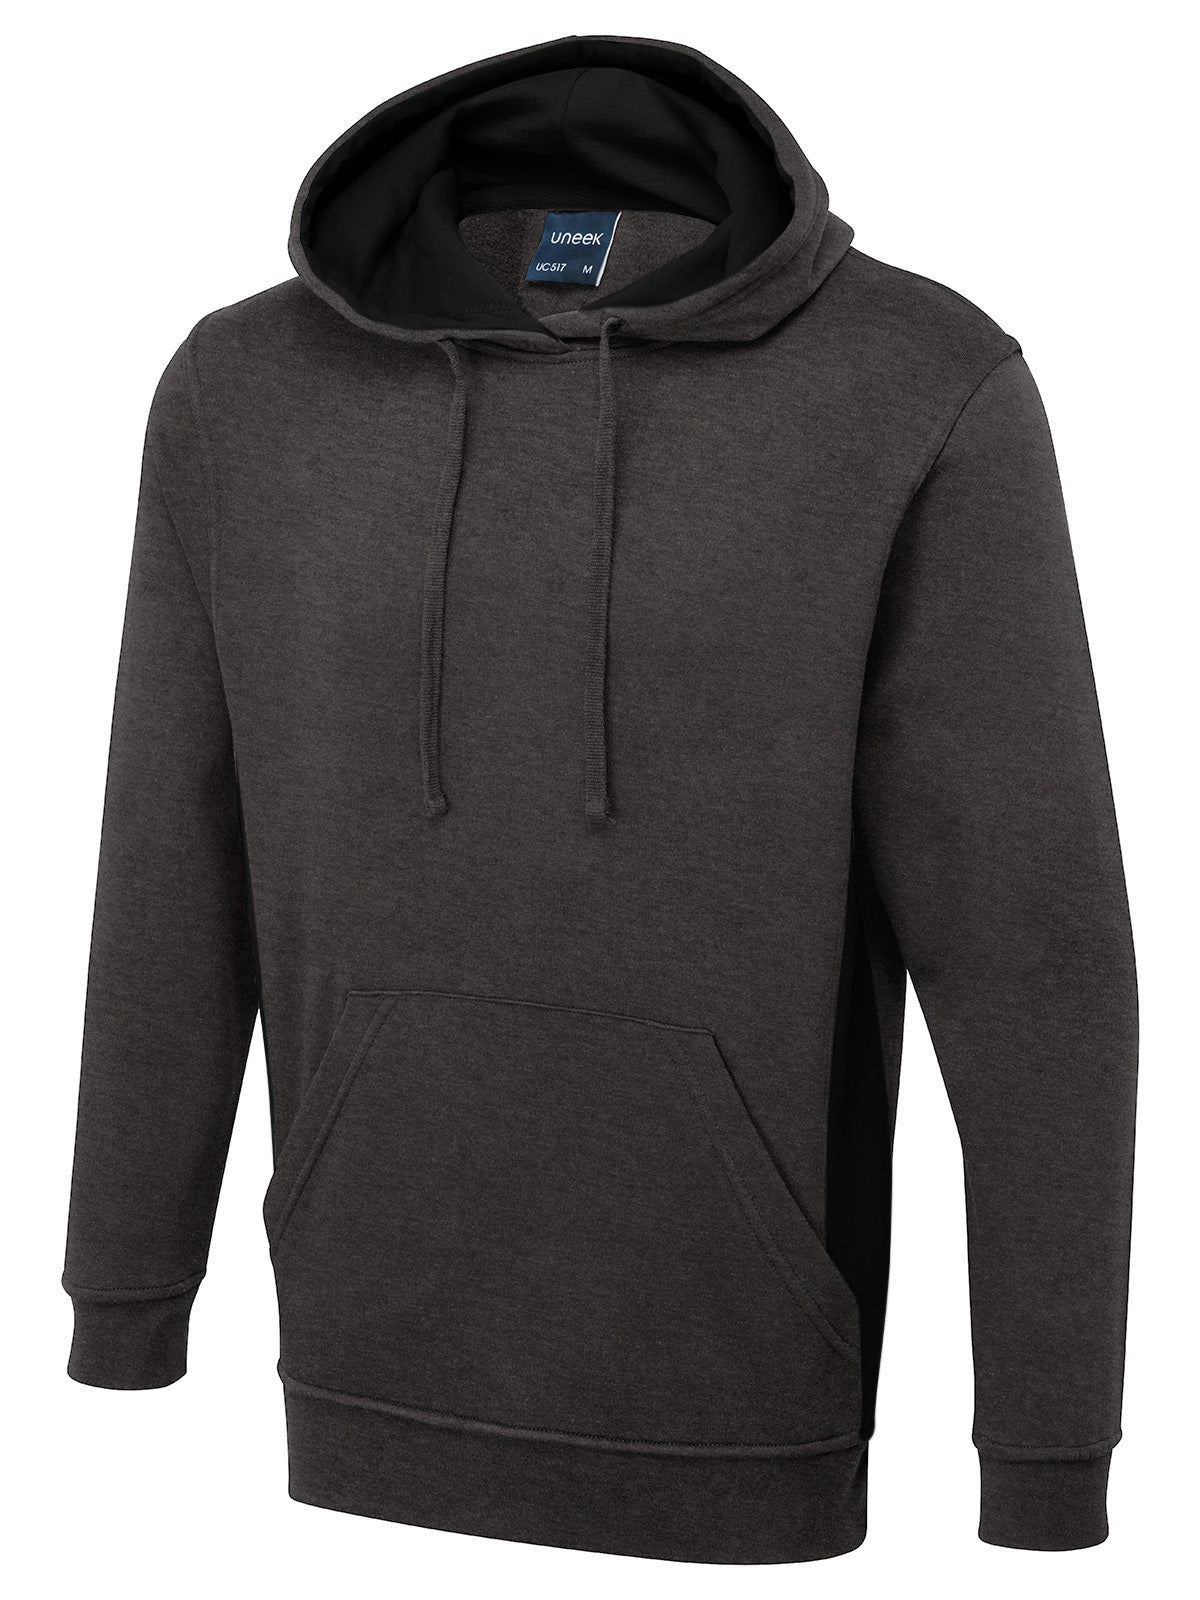 City Car Cup Unisex Two-Tone Hoodie